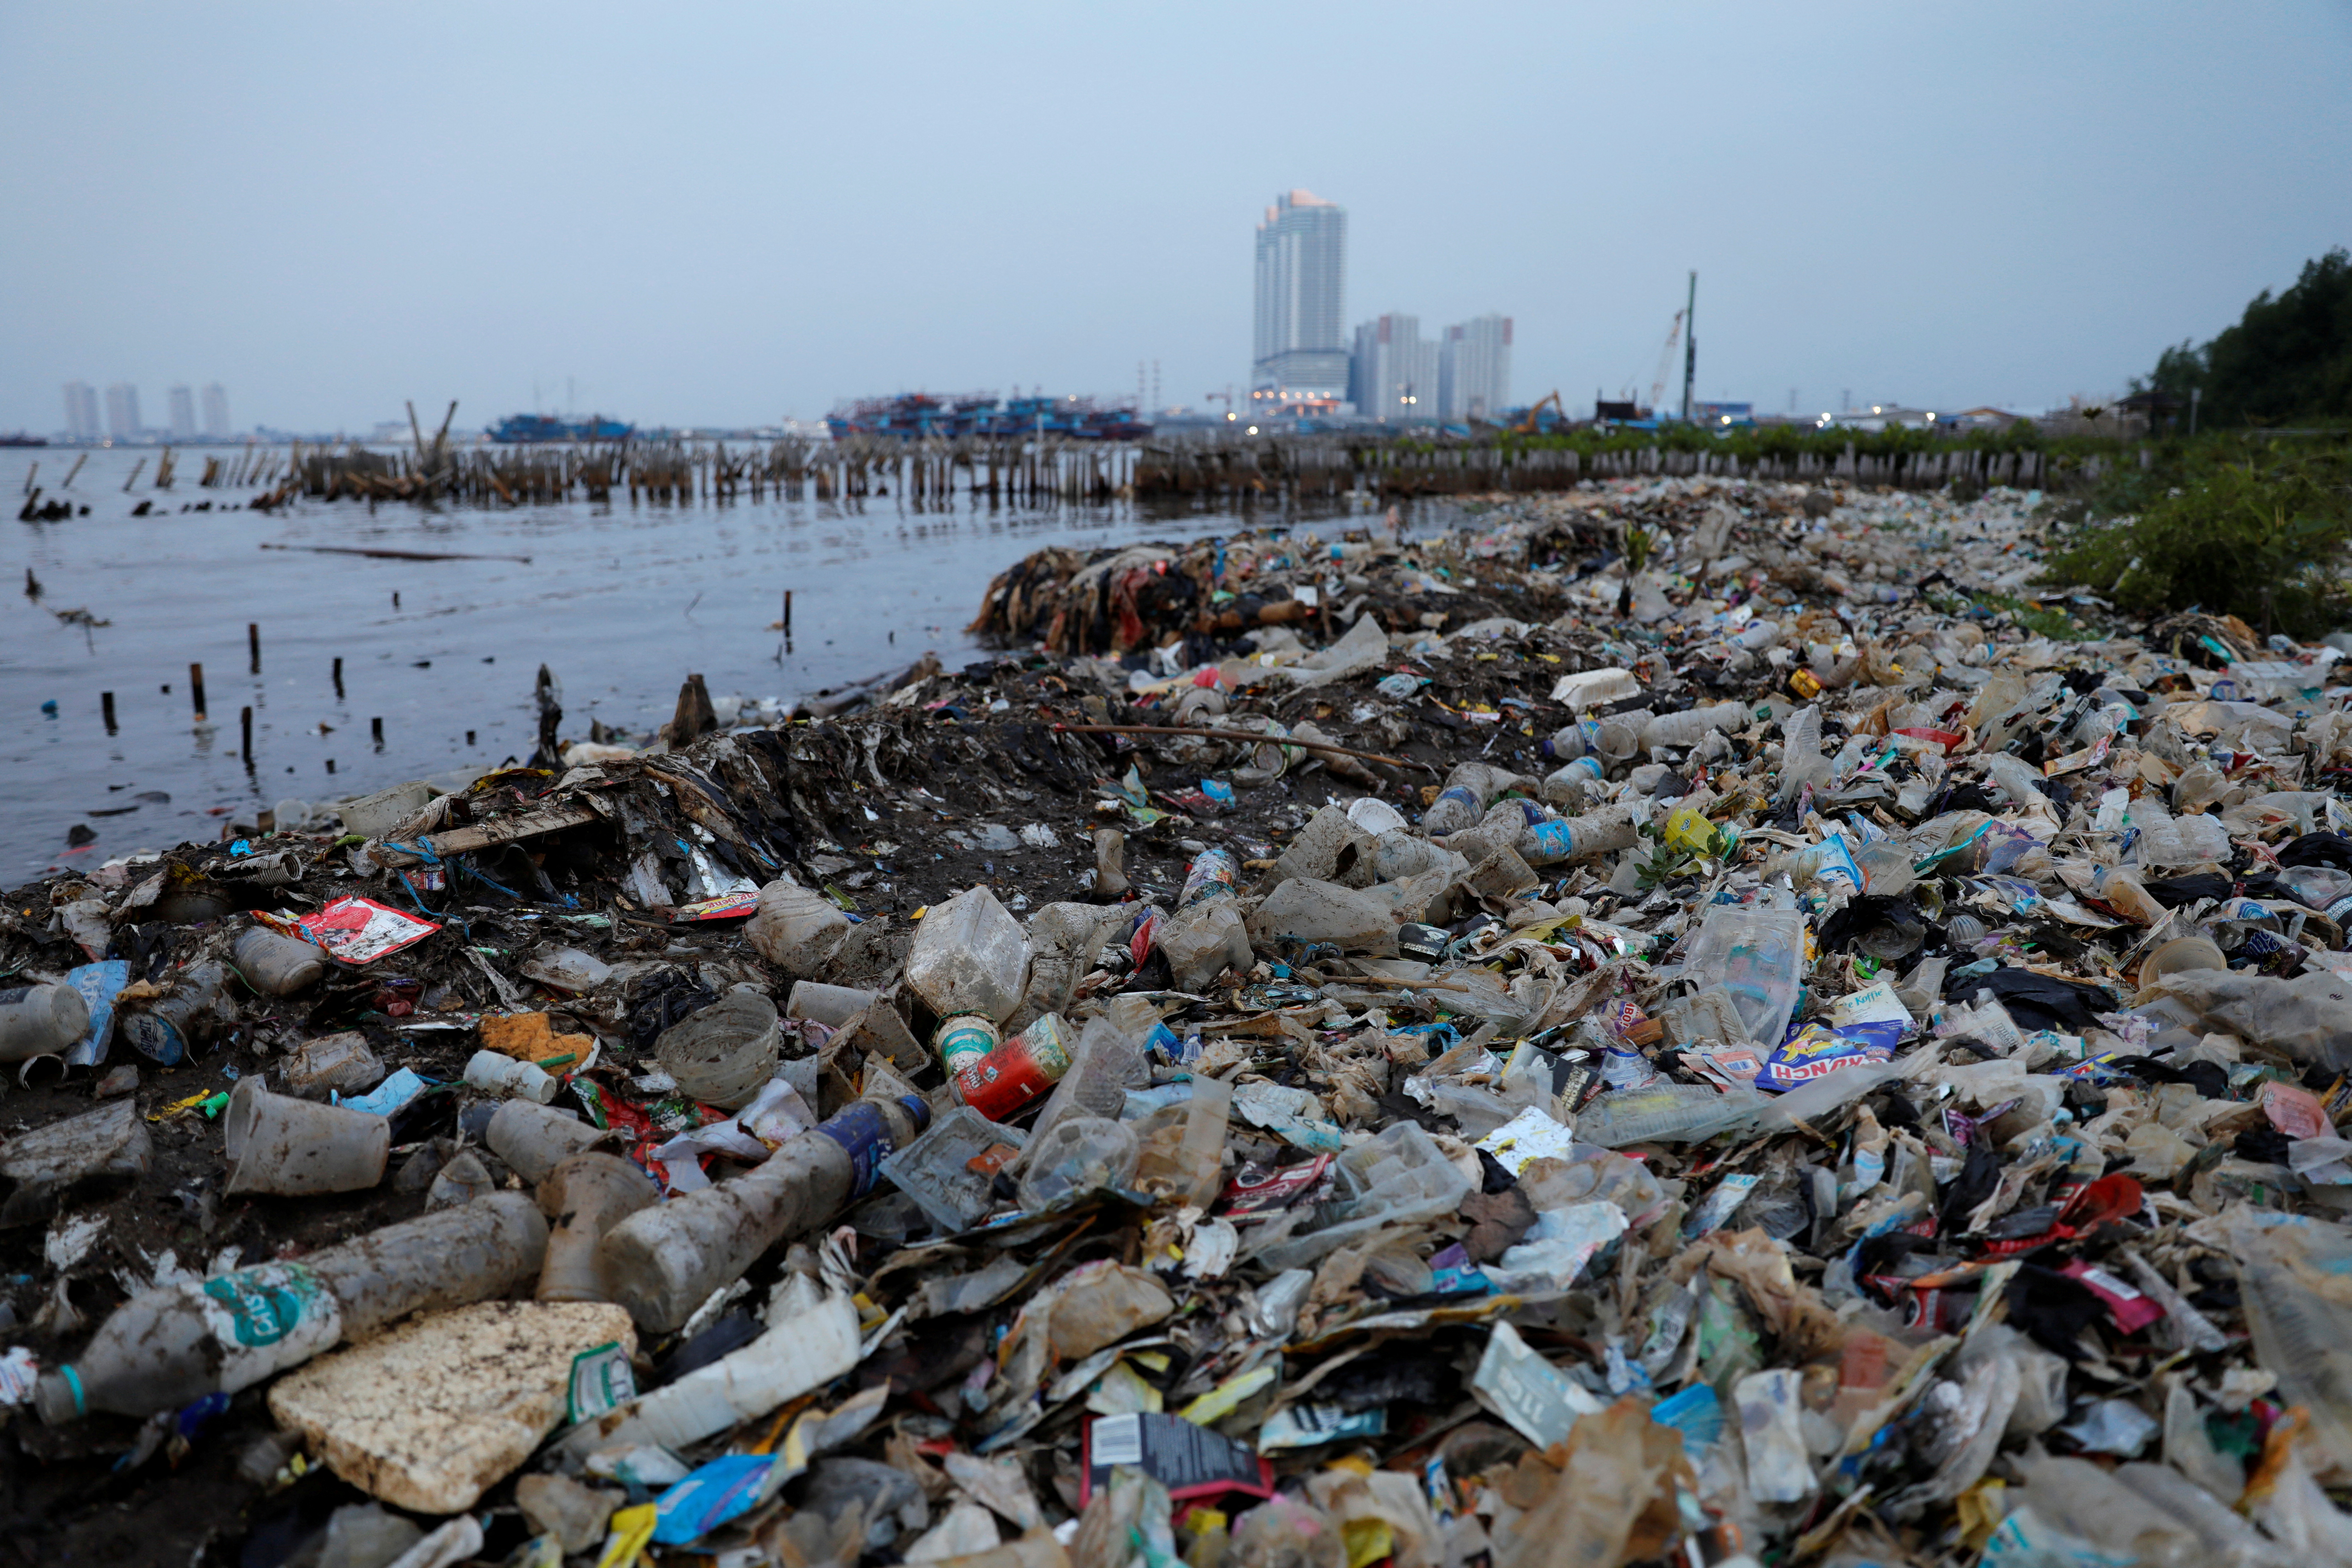 Rubbish, most of which is plastics, is seen along a shoreline in Jakarta